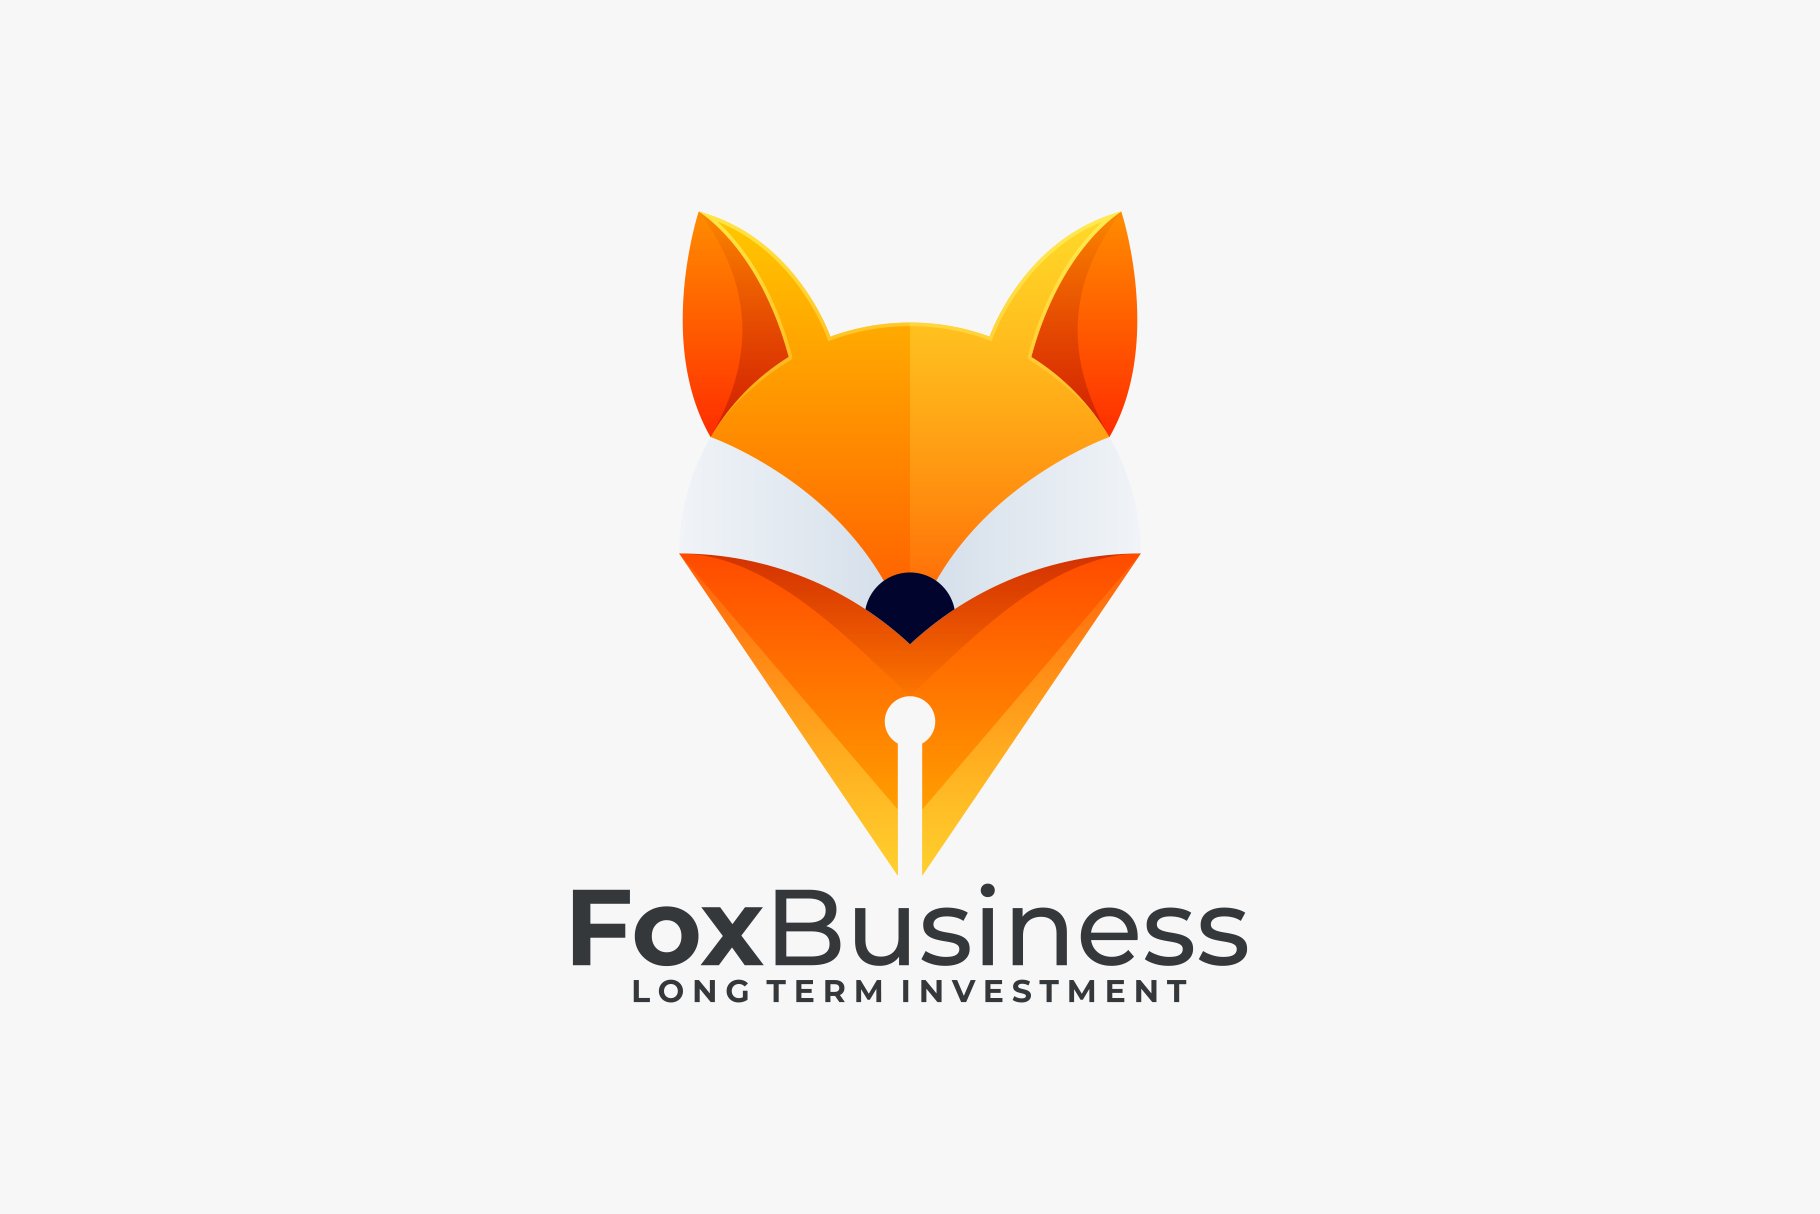 Fox Business Gradient Colorful Style cover image.